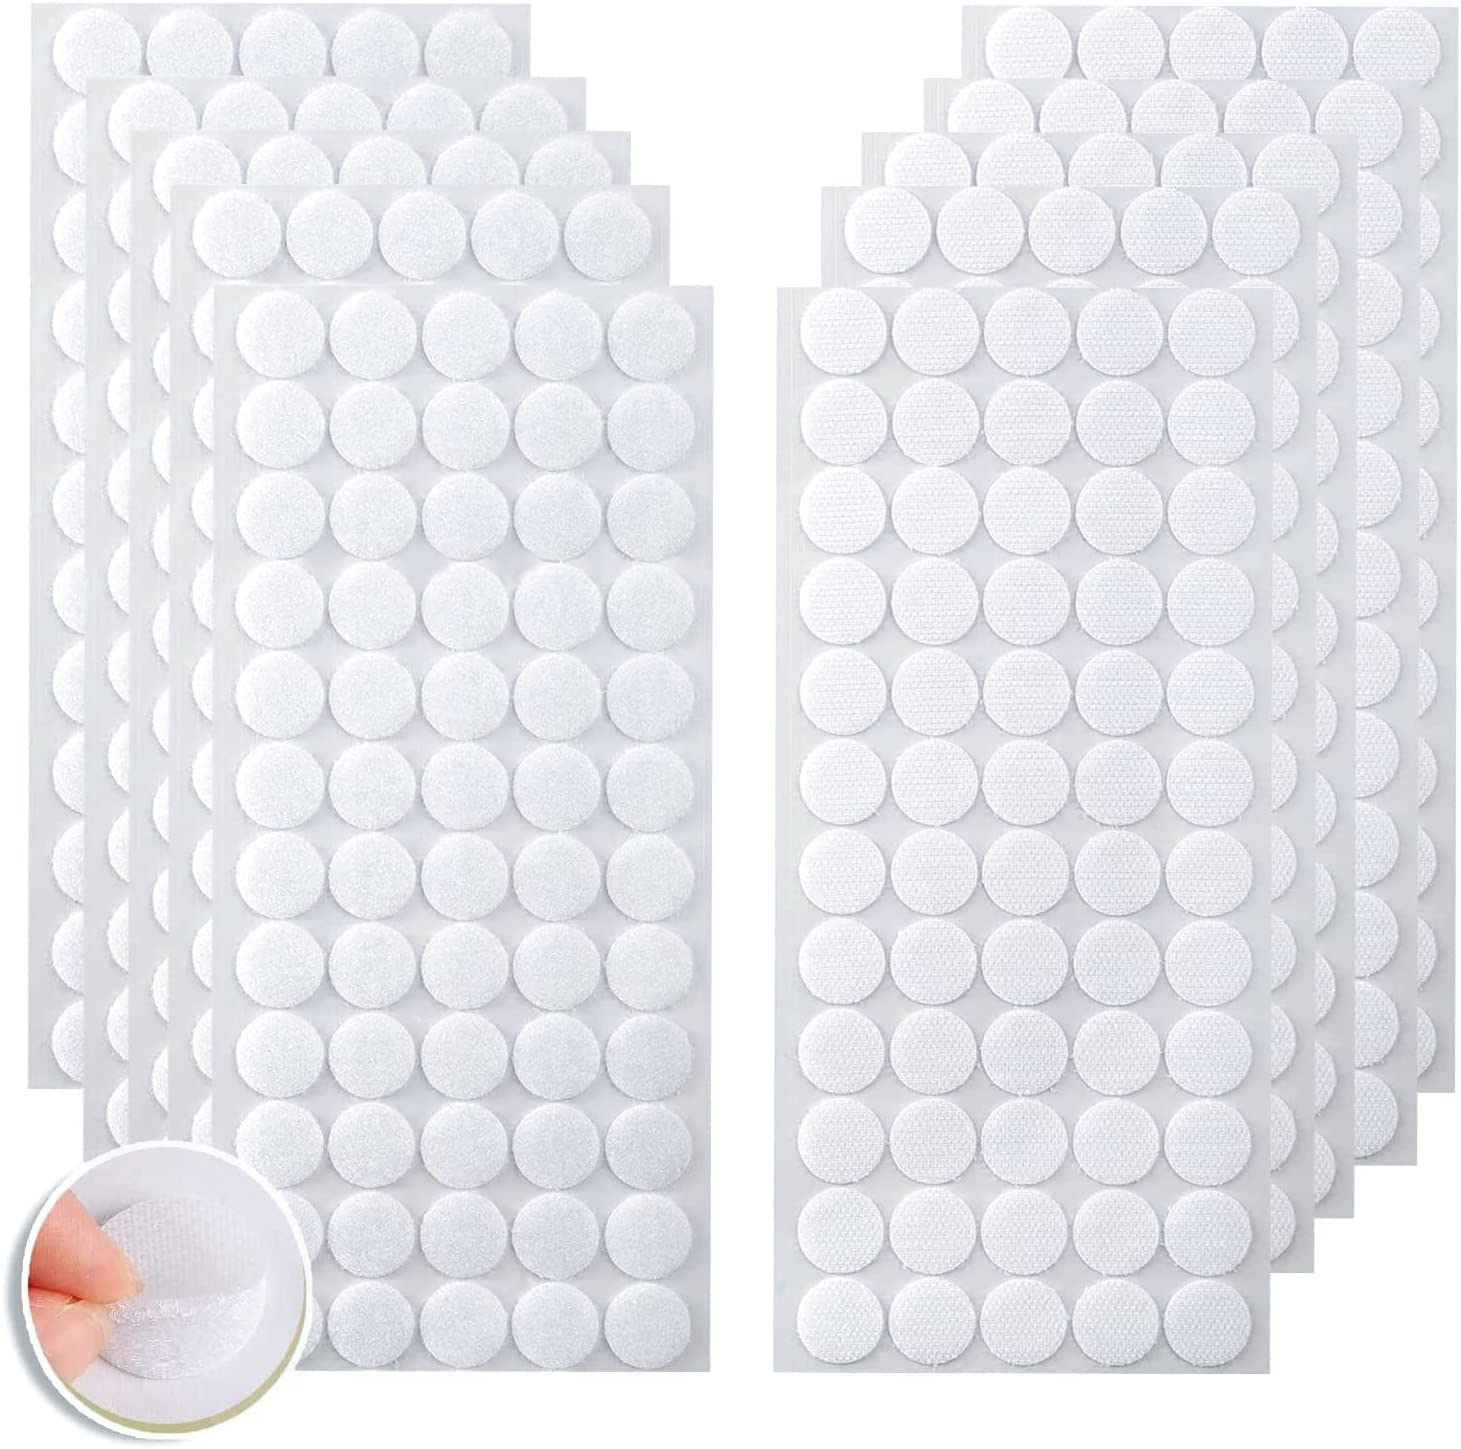  Hompie 400pcs (200 Pair Sets) 15mm Diameter Sticky Back Hook,  Self Adhesive Dots Loop Tapes for DIY Crafts Office Classroom (White) :  Arts, Crafts & Sewing